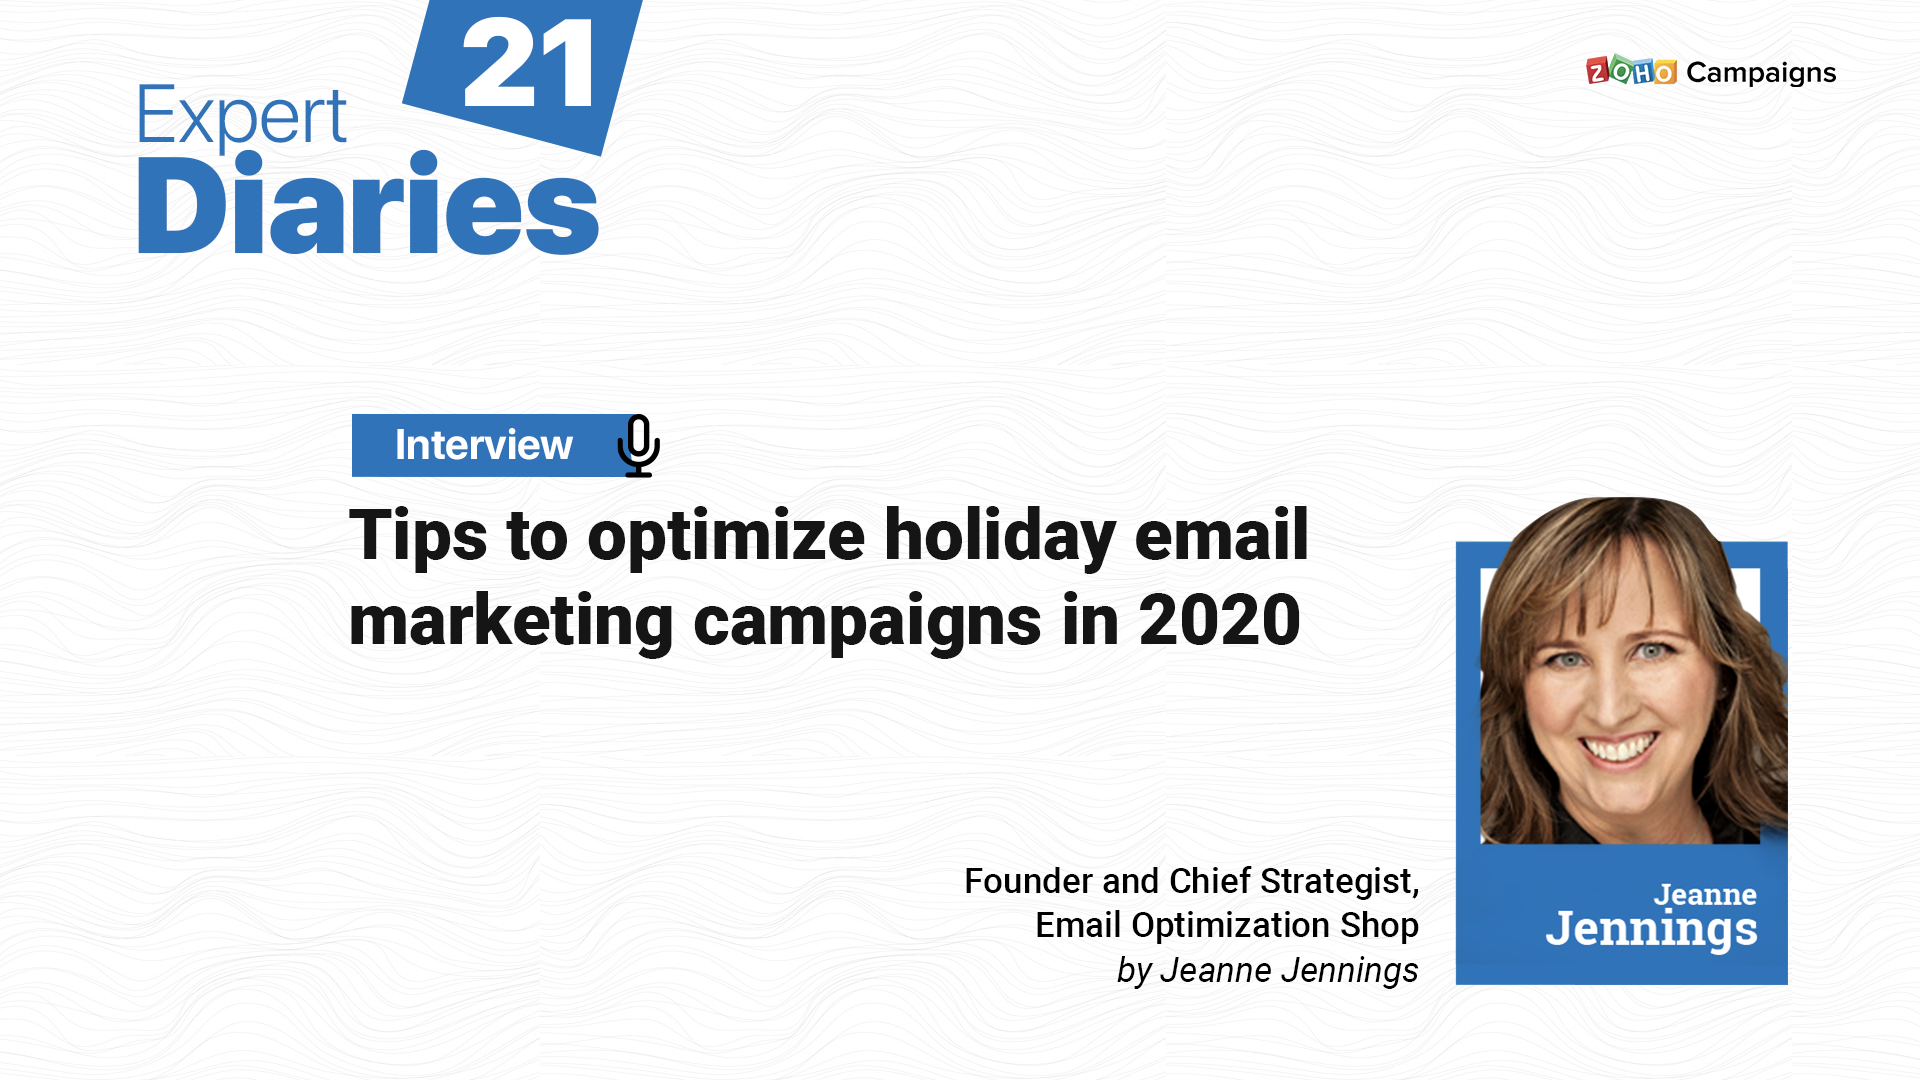 Tips to optimize holiday email marketing campaigns in 2020